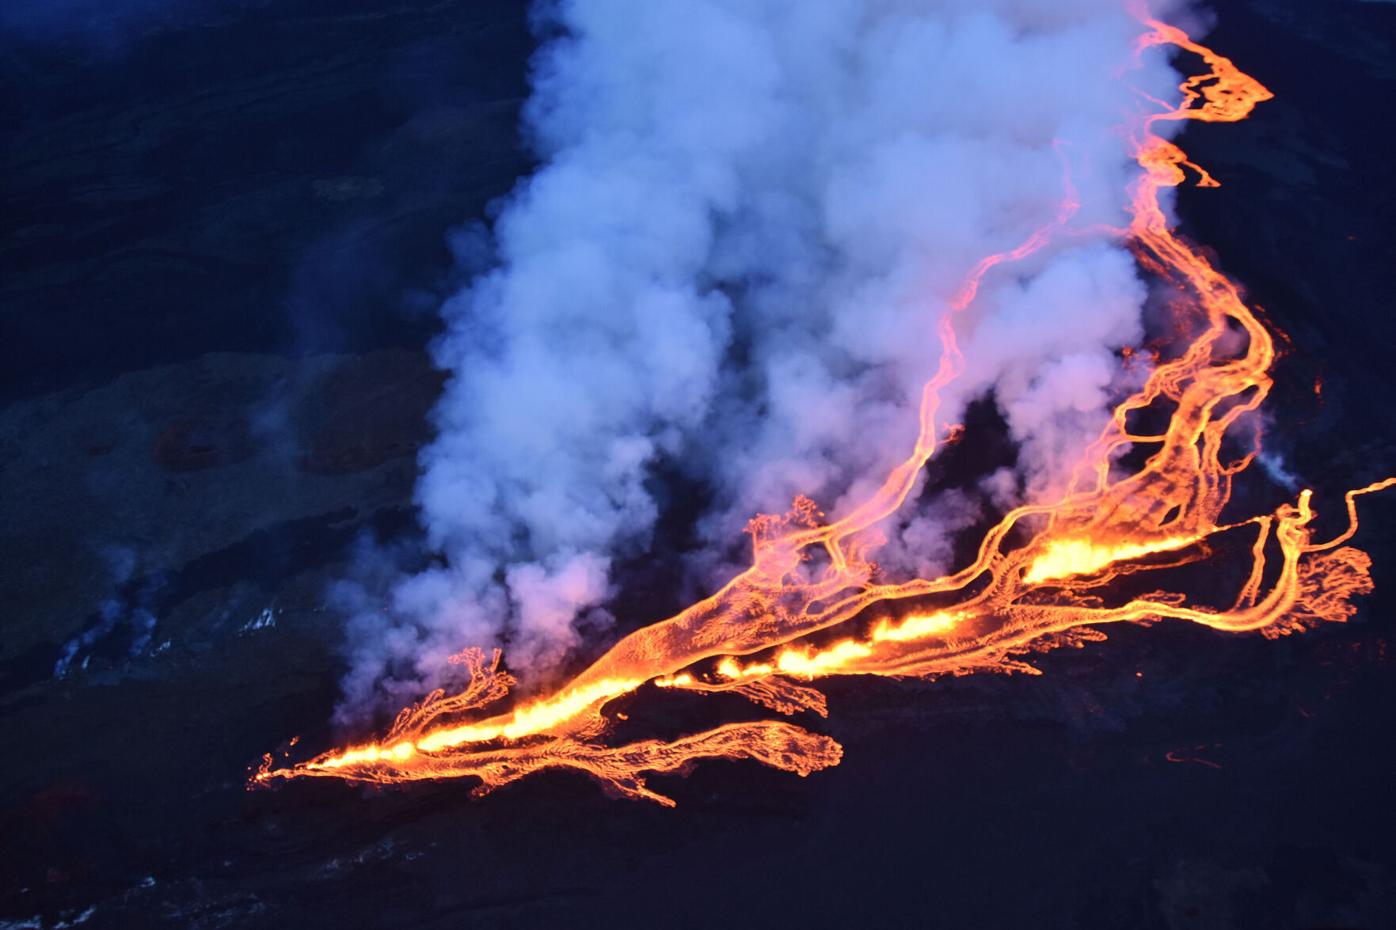 List and describe other volcanos currently active besides from Mauna Loa volcano in Hawaii